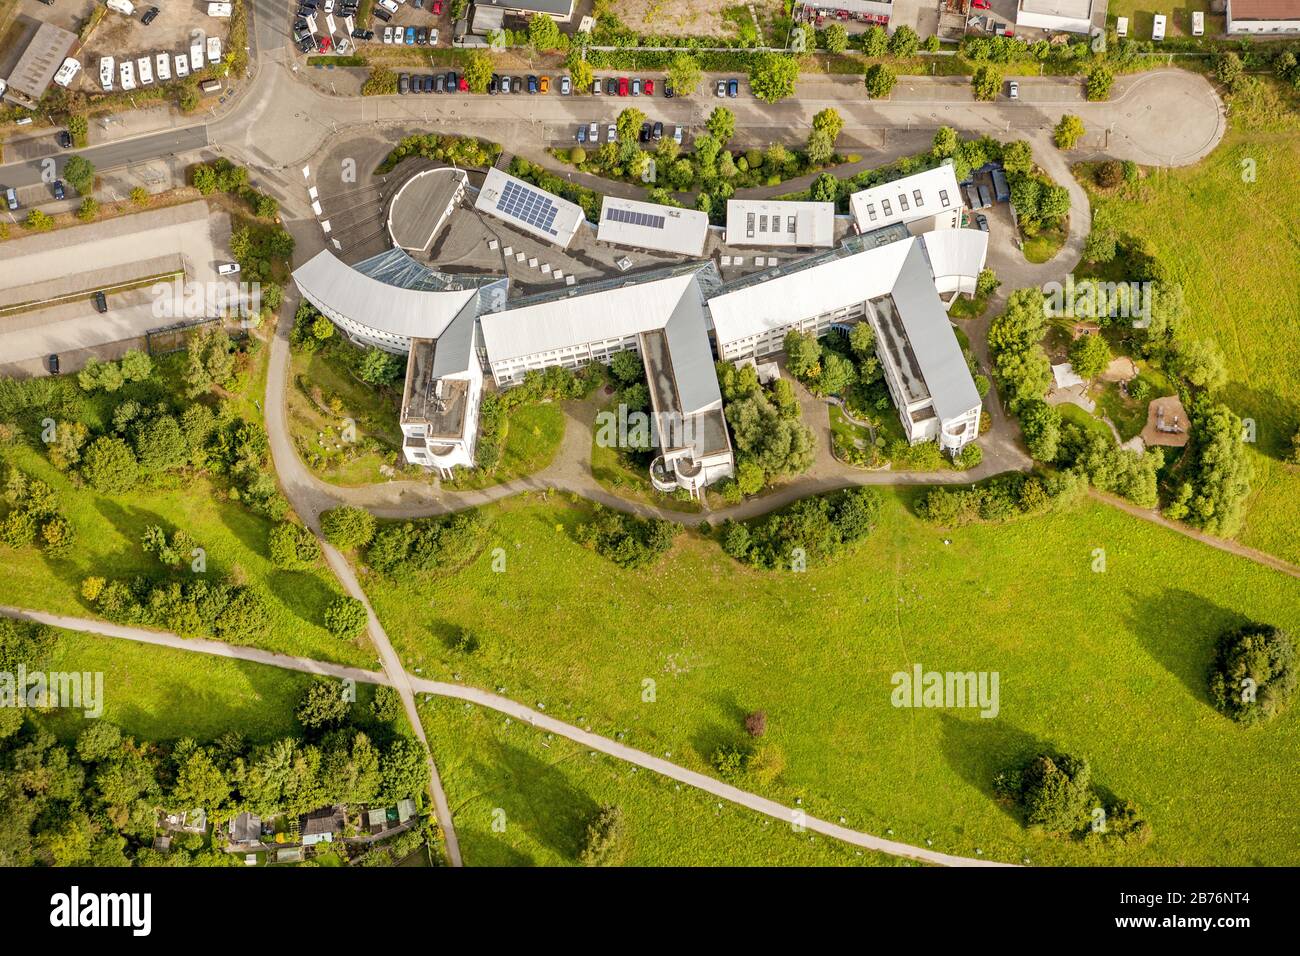 , campus of the private university Witten/Herdecke, 12.09.2012, aerial view, Germany, North Rhine-Westphalia, Ruhr Area, Witten Stock Photo